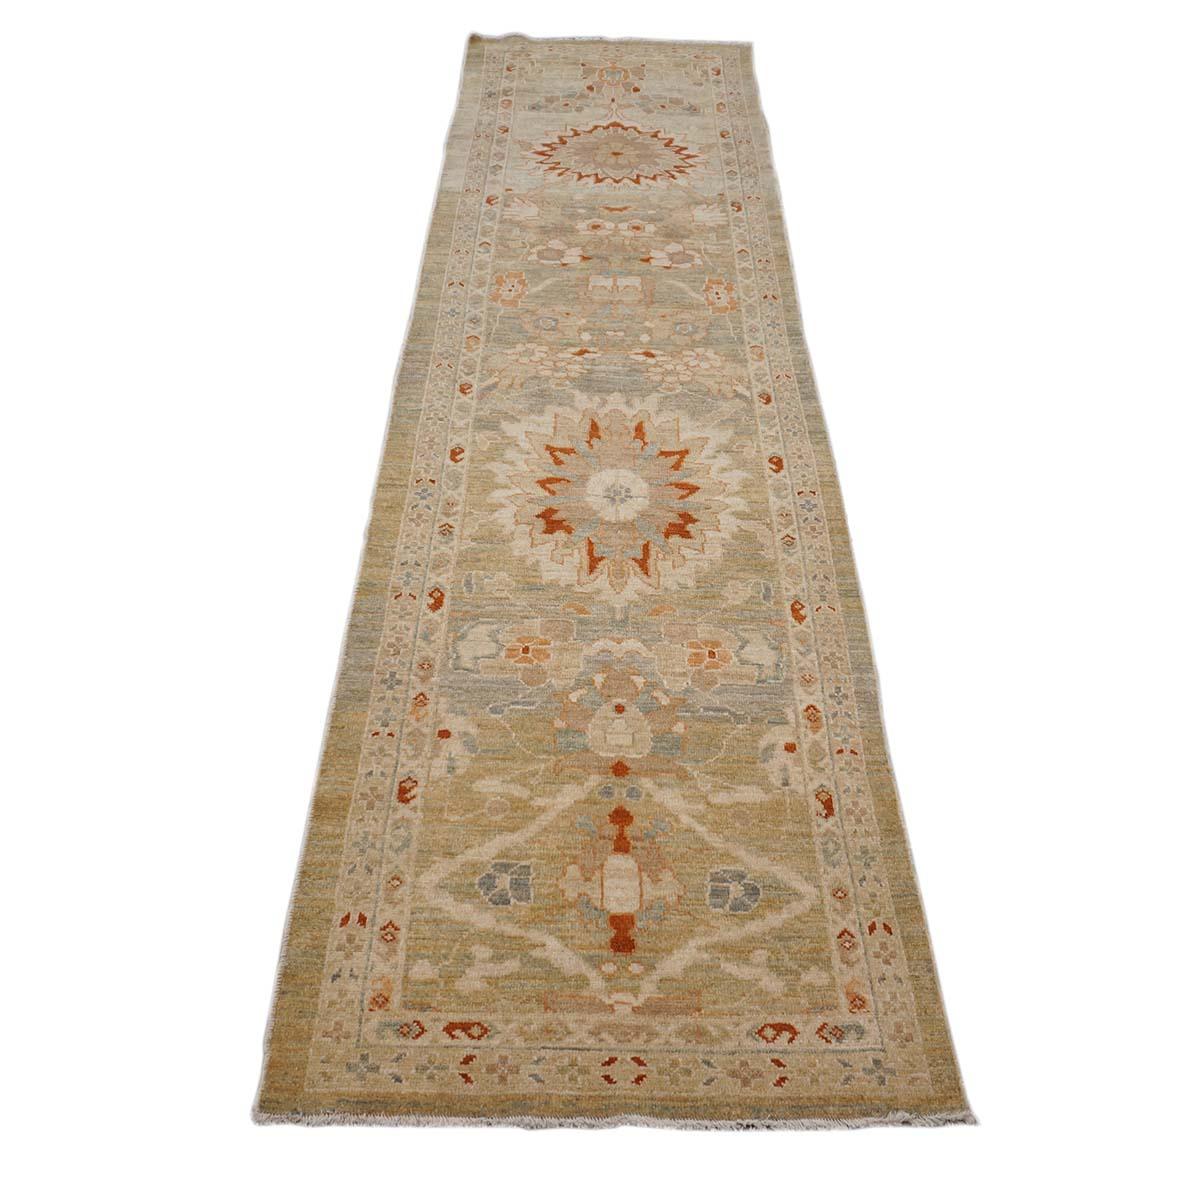 Ashly fine Rugs presents an antique recreation of an original Persian Sultanabad hall runner. Part of our own previous production, this antique recreation was thought of and created in-house and 100% handmade in Turkey by master weavers. Sultanabads